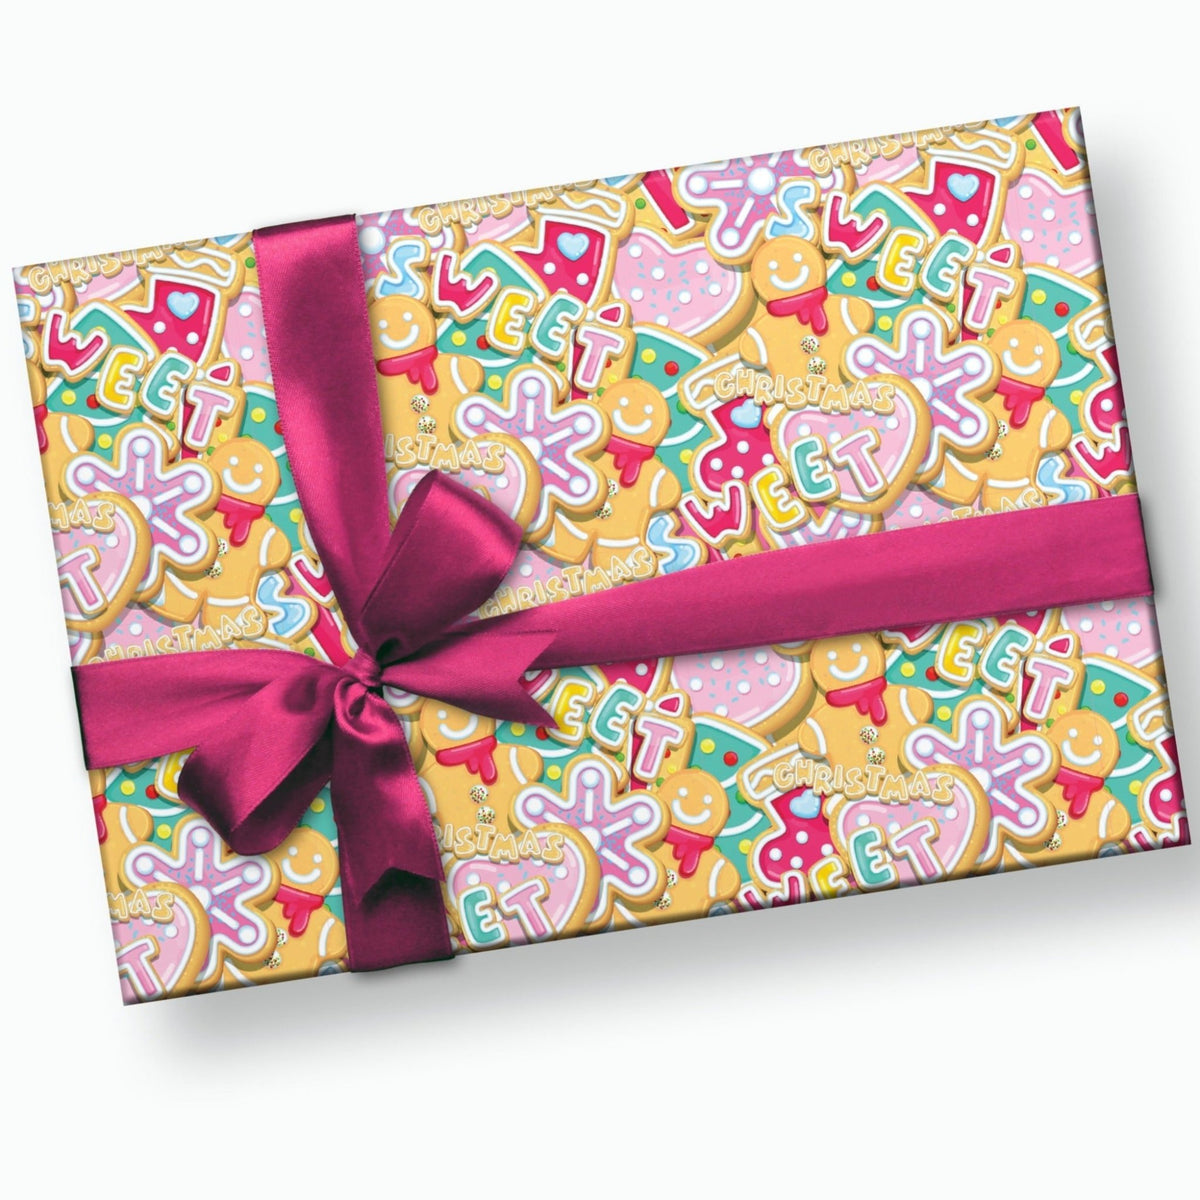 Cassette Tape Wrapping Paper - Stesha Party - birthday, birthday